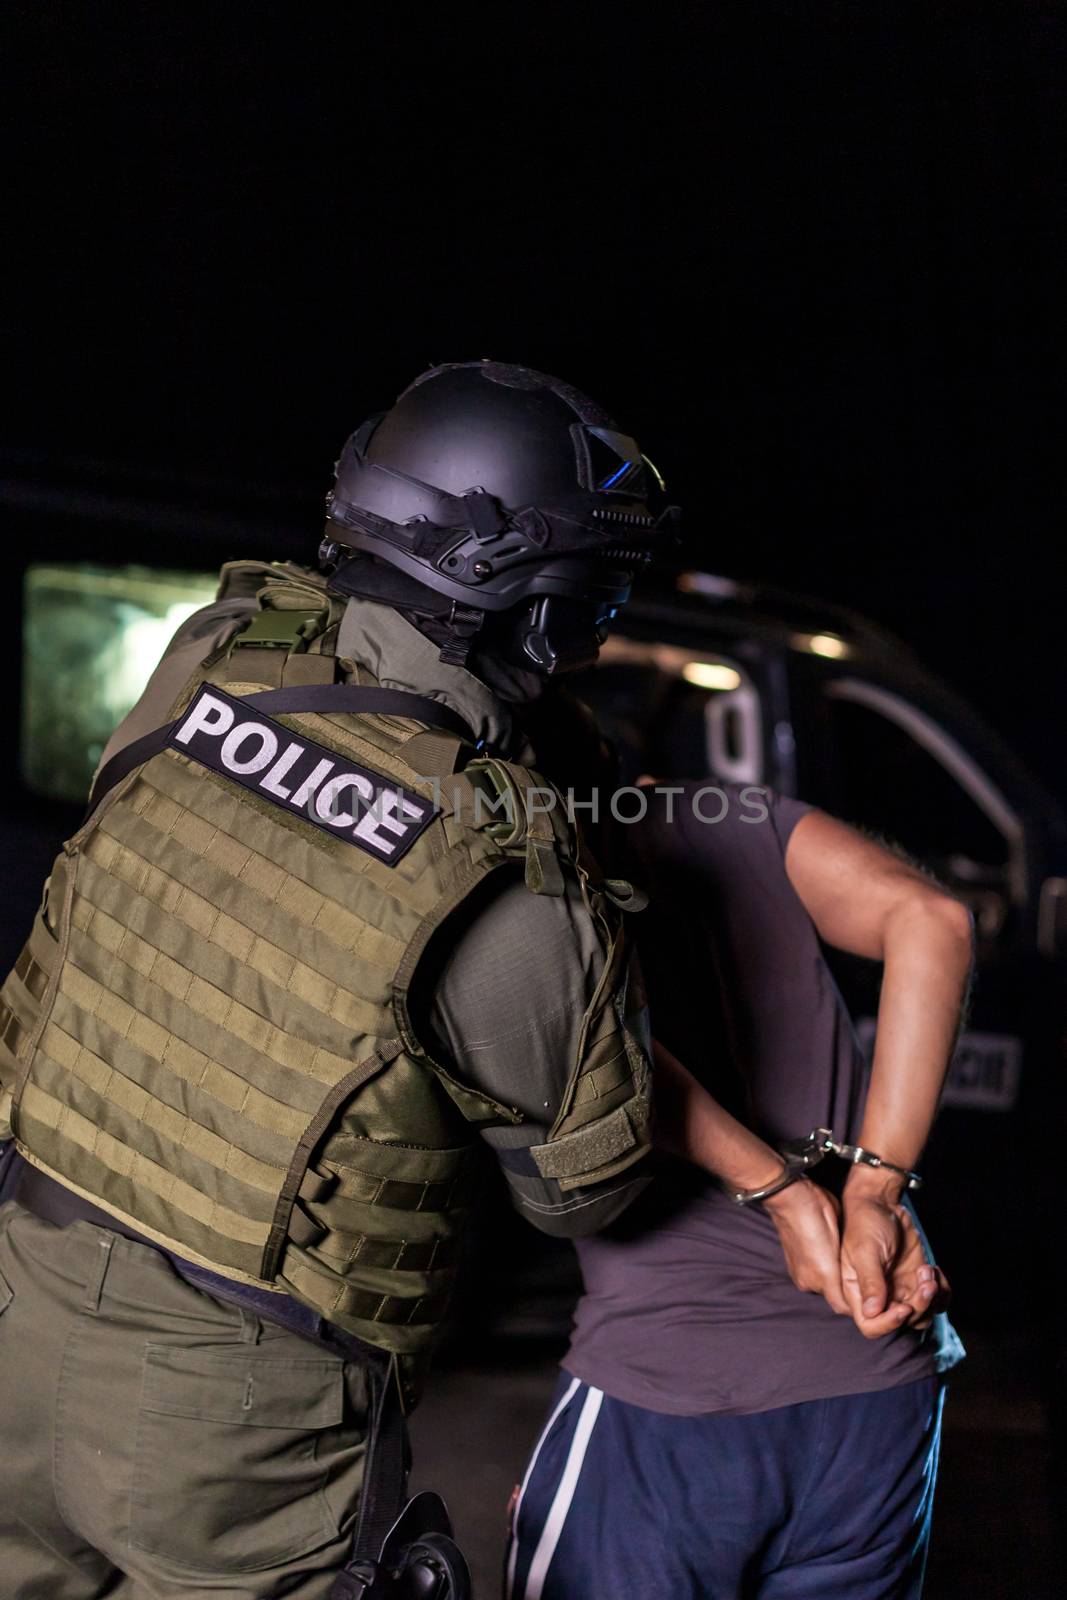 A police officer puts handcuffs on a criminal's hands during an arrest. Police car with flashing lighthouses. Blurried by Edophoto